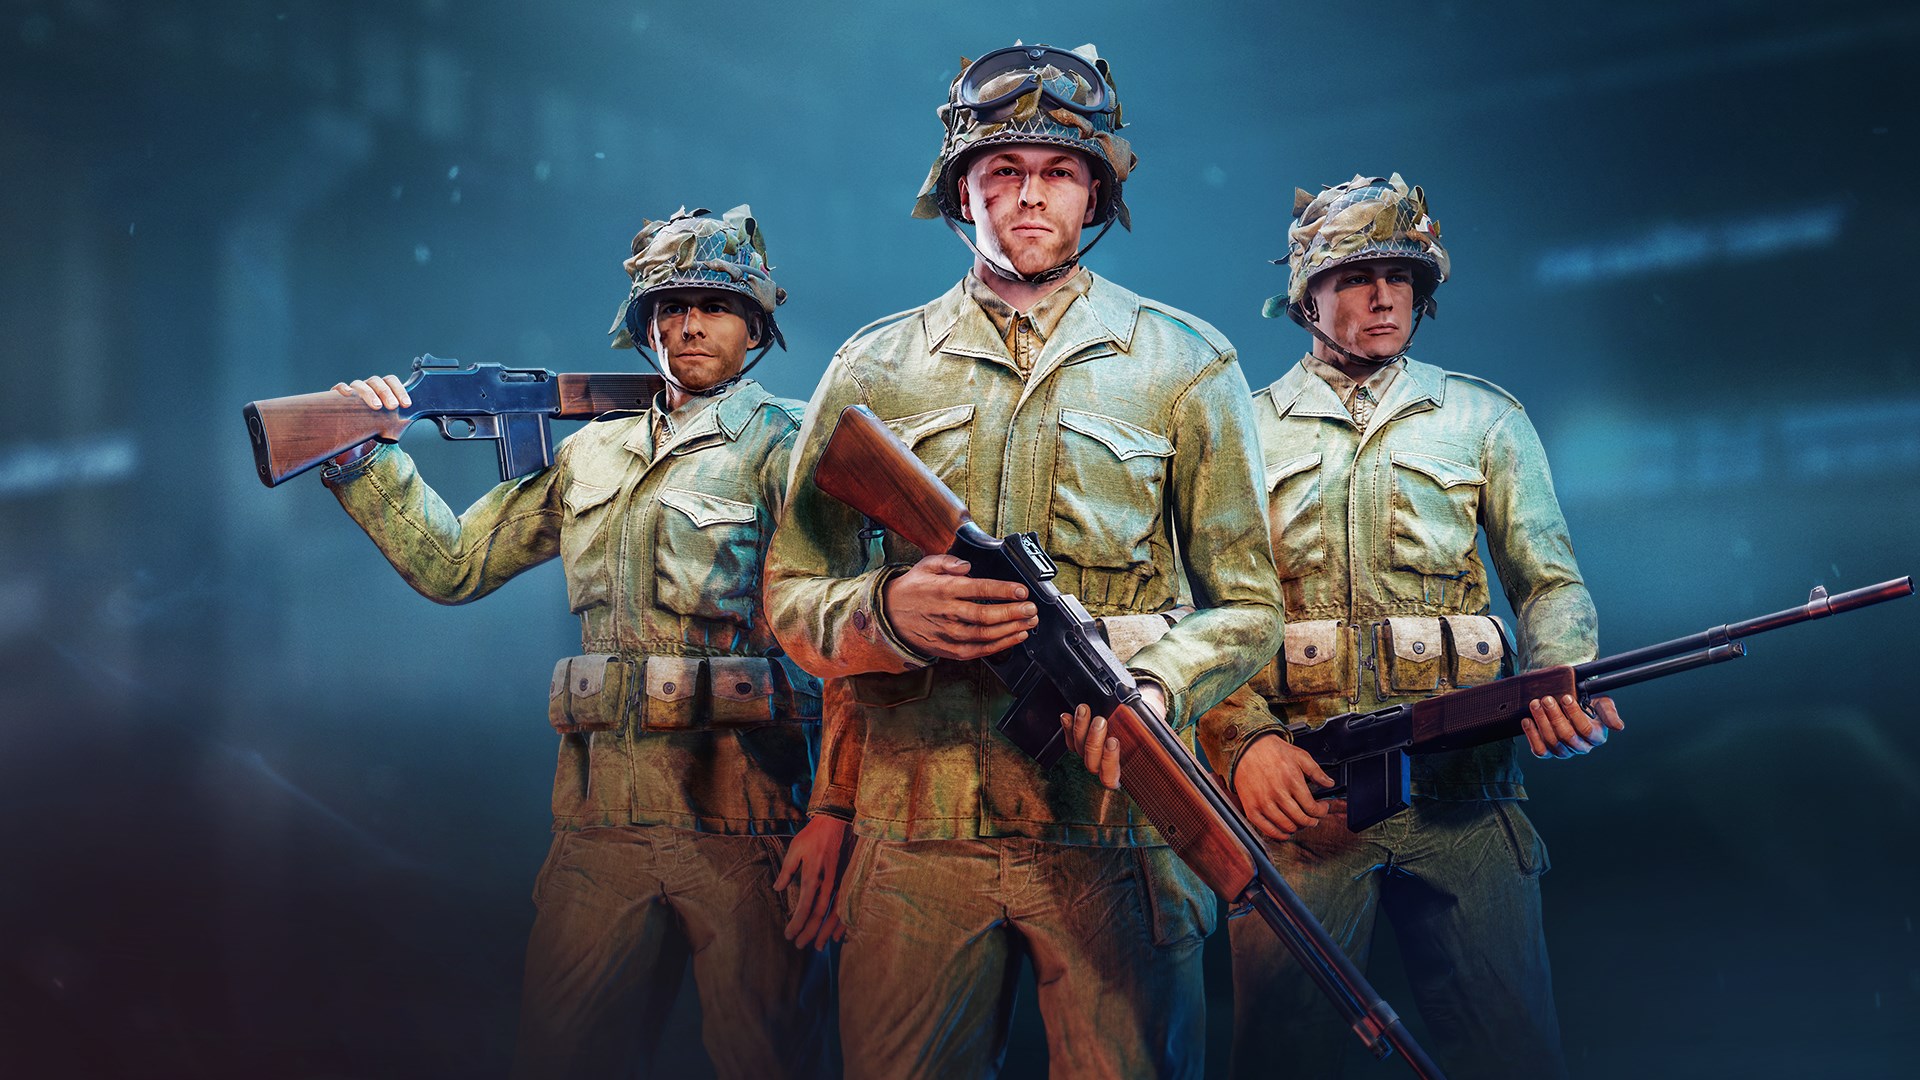 Enlisted - "Invasion of Normandy": Browning M1918 Squad Bundle